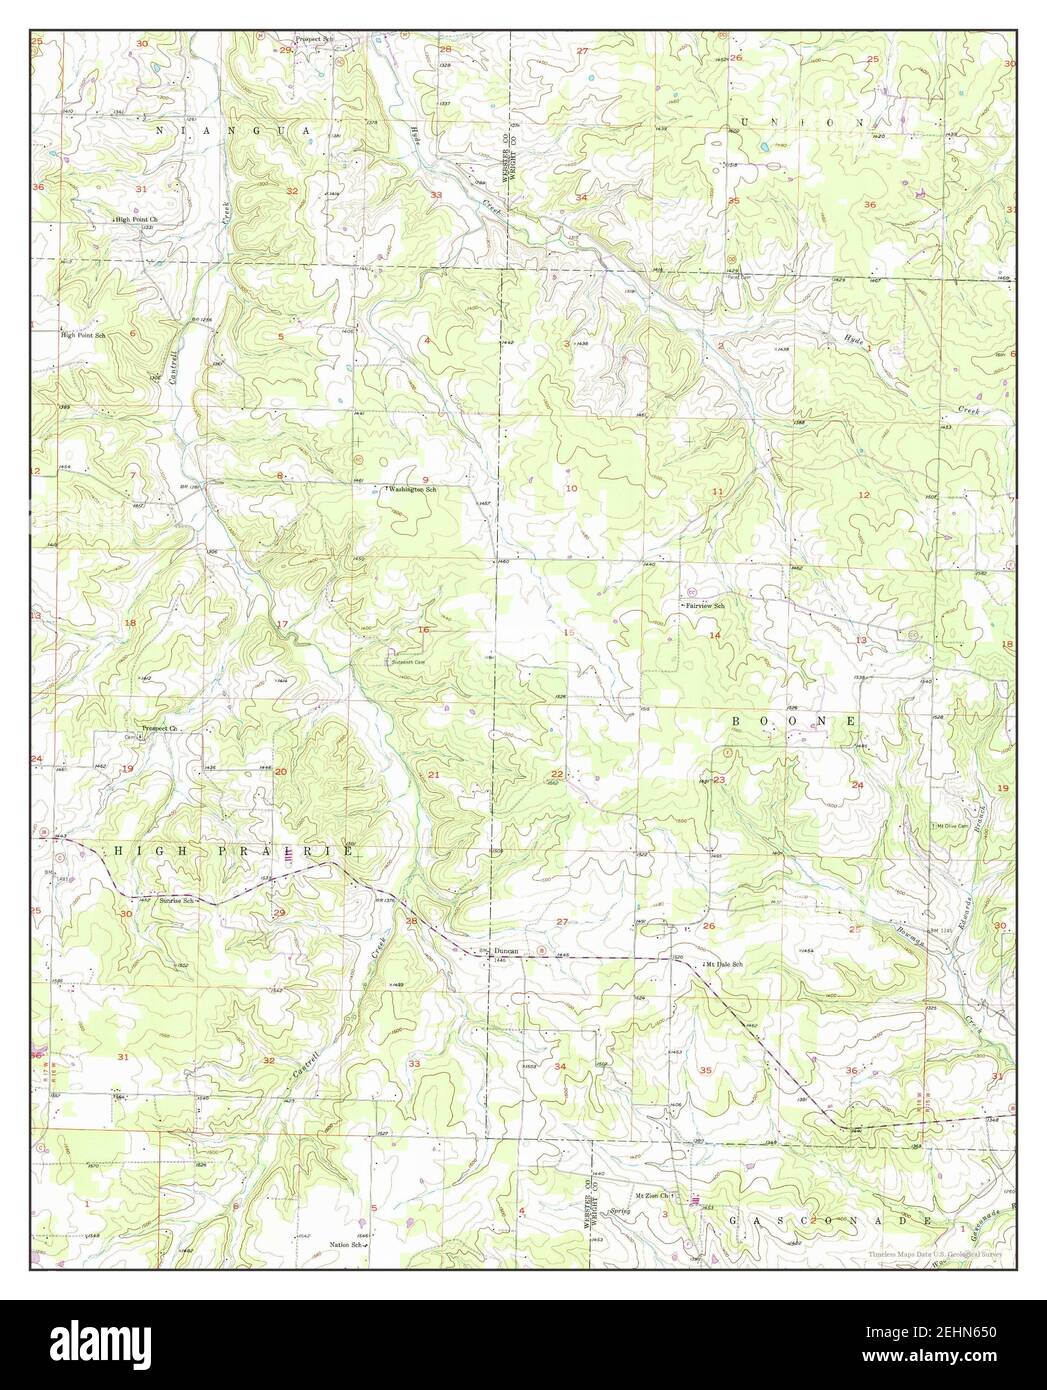 Duncan, Missouri, map 1956, 1:24000, United States of America by Timeless Maps, data U.S. Geological Survey Stock Photo